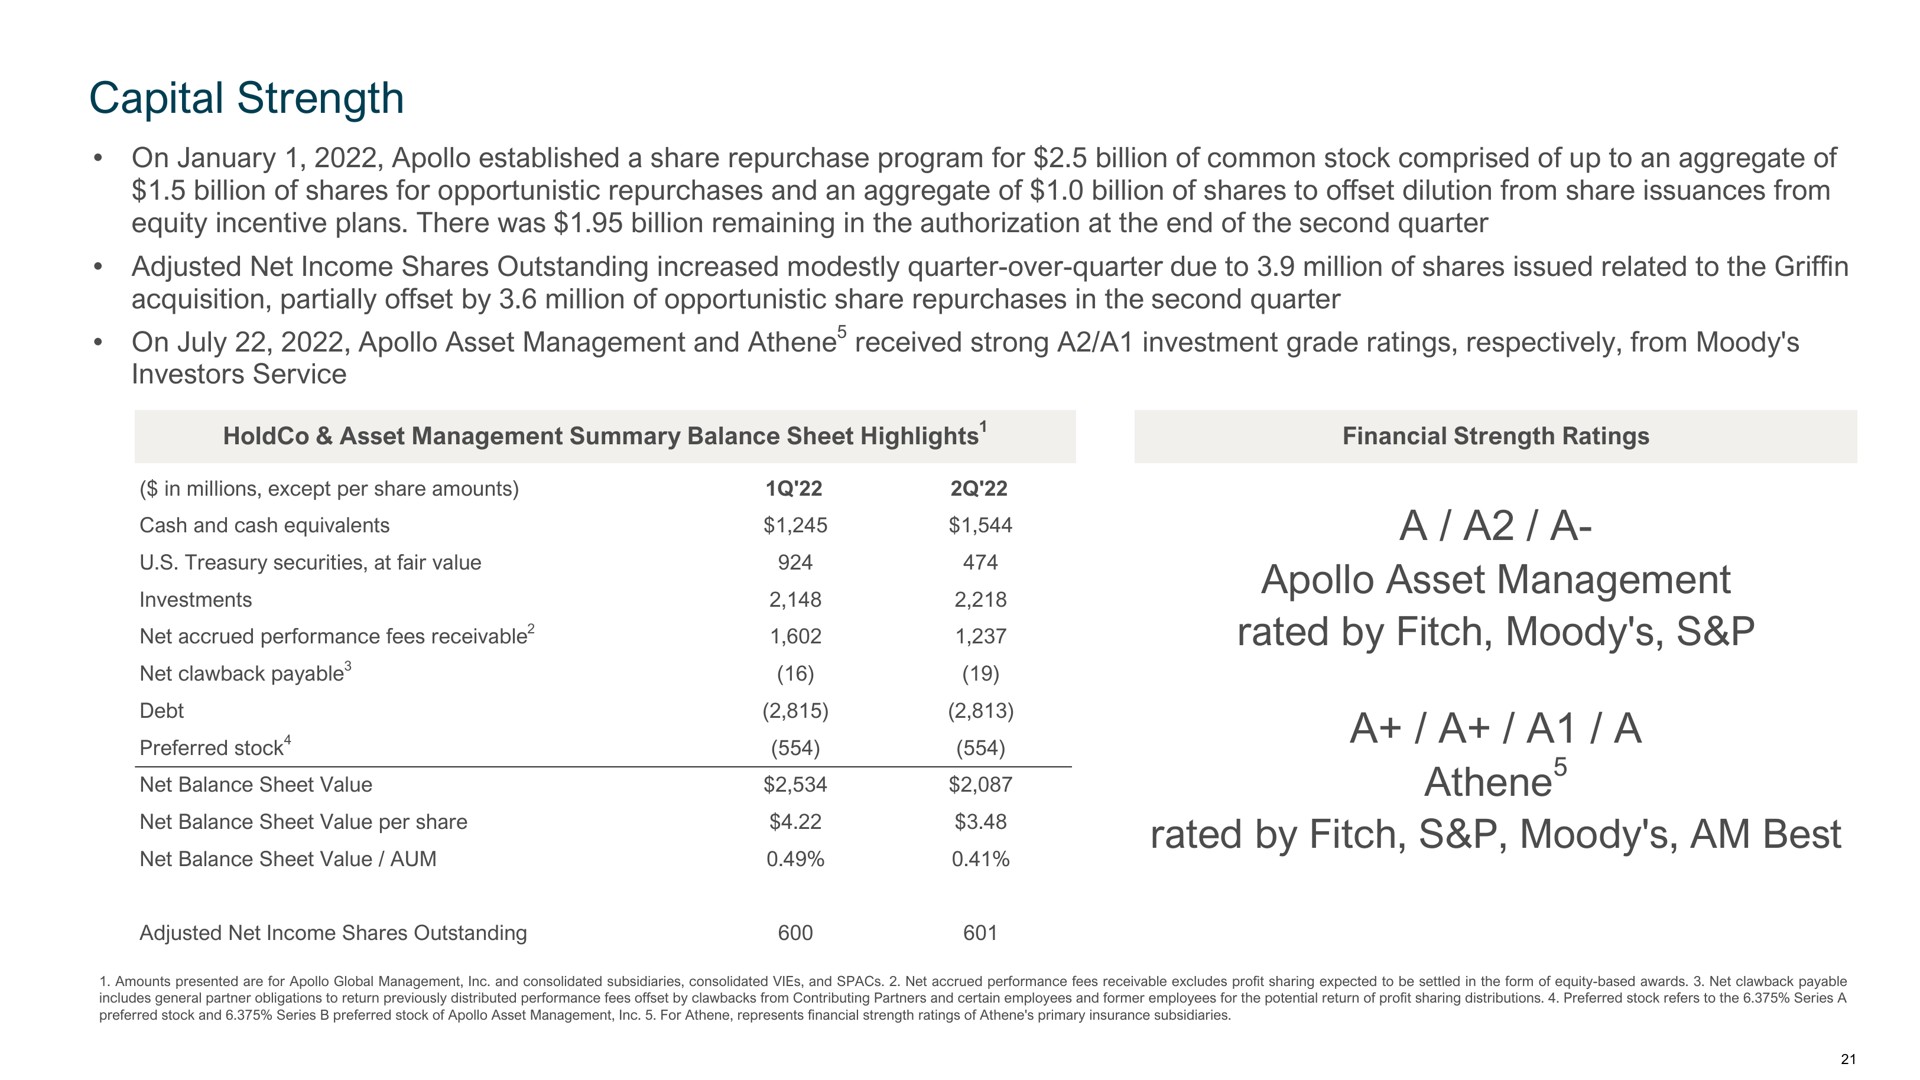 capital strength on established a share repurchase program for billion of common stock comprised of up to an aggregate of billion of shares for opportunistic repurchases and an aggregate of billion of shares to offset dilution from share issuances from equity incentive plans there was billion remaining in the authorization at the end of the second quarter adjusted net income shares outstanding increased modestly quarter over quarter due to million of shares issued related to the griffin acquisition partially offset by million of opportunistic share repurchases in the second quarter on asset management and received strong a a investment grade ratings respectively from moody investors service a a a asset management rated by fitch moody a a a a rated by fitch moody am best | Apollo Global Management